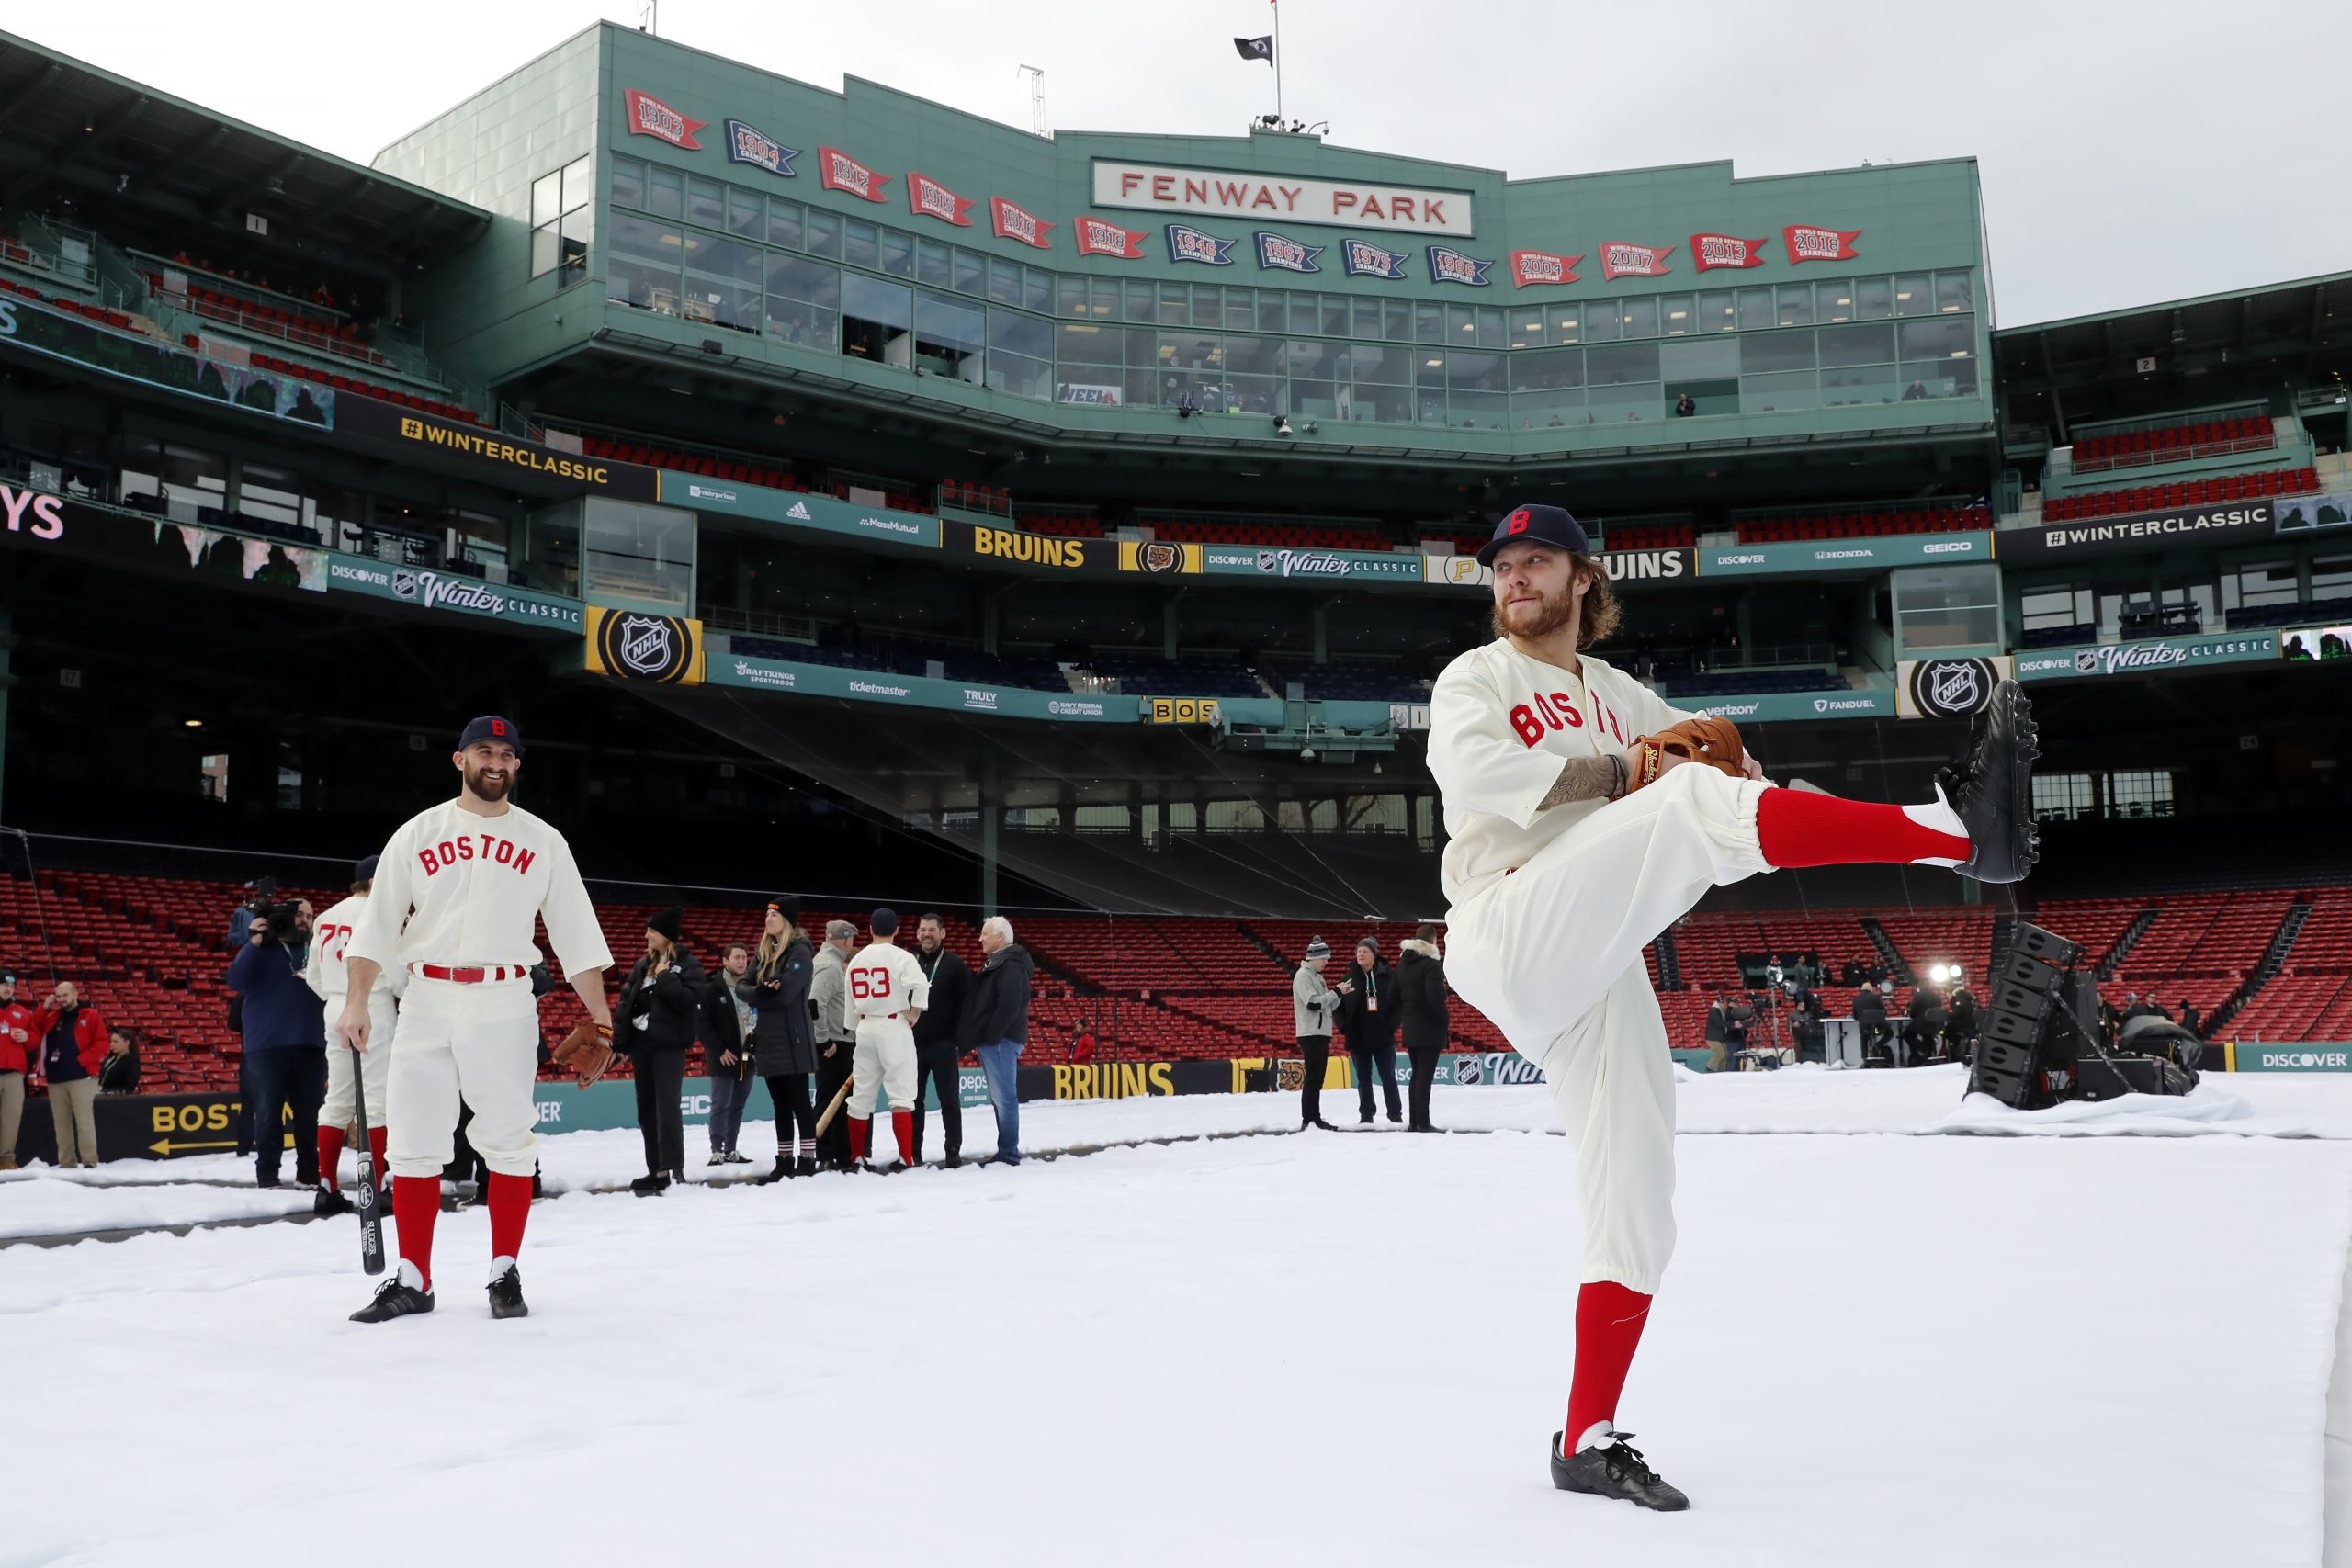 Preparations continue at Fenway Park ahead of 2023 Winter Classic